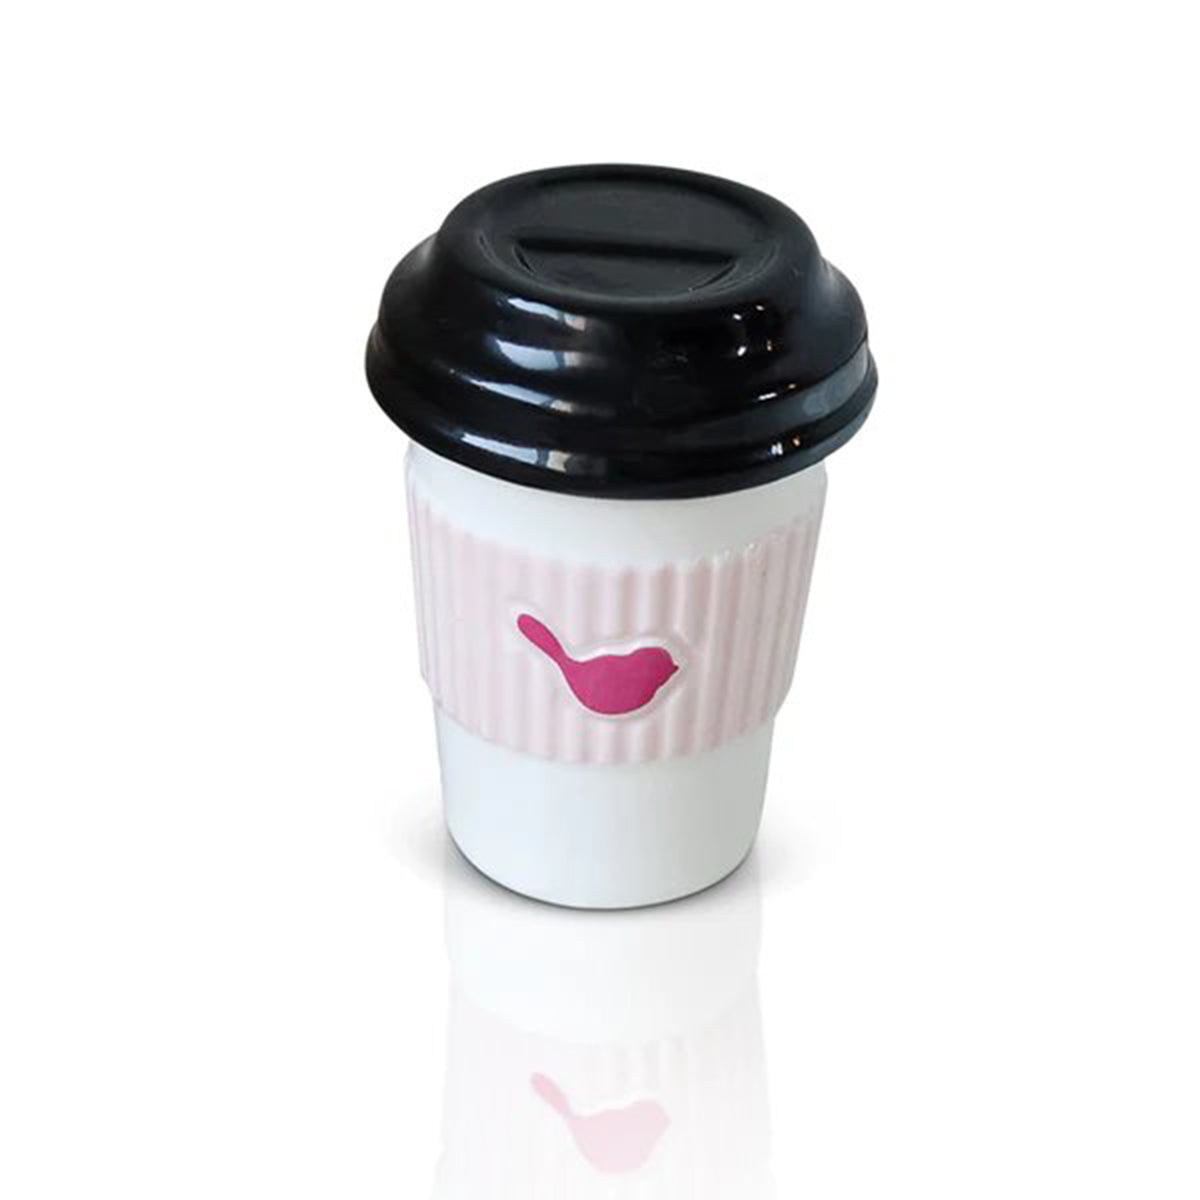 Nora Fleming "Cup of Ambition" Coffee Mini